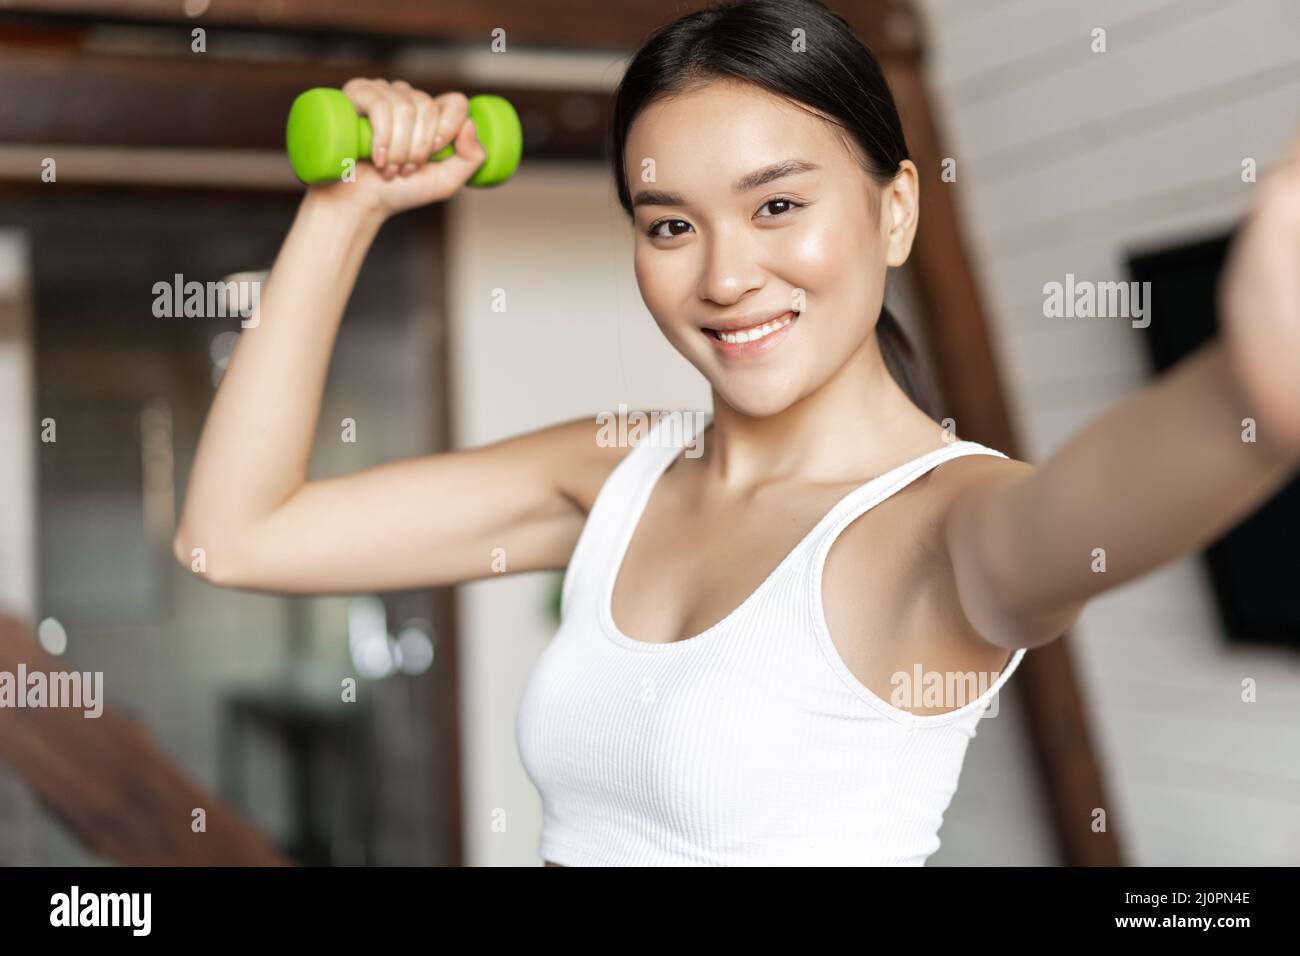 Smiling korean girl taking selfie with dumbbell, workout at home during pandemic, wearing activewear Stock Photo